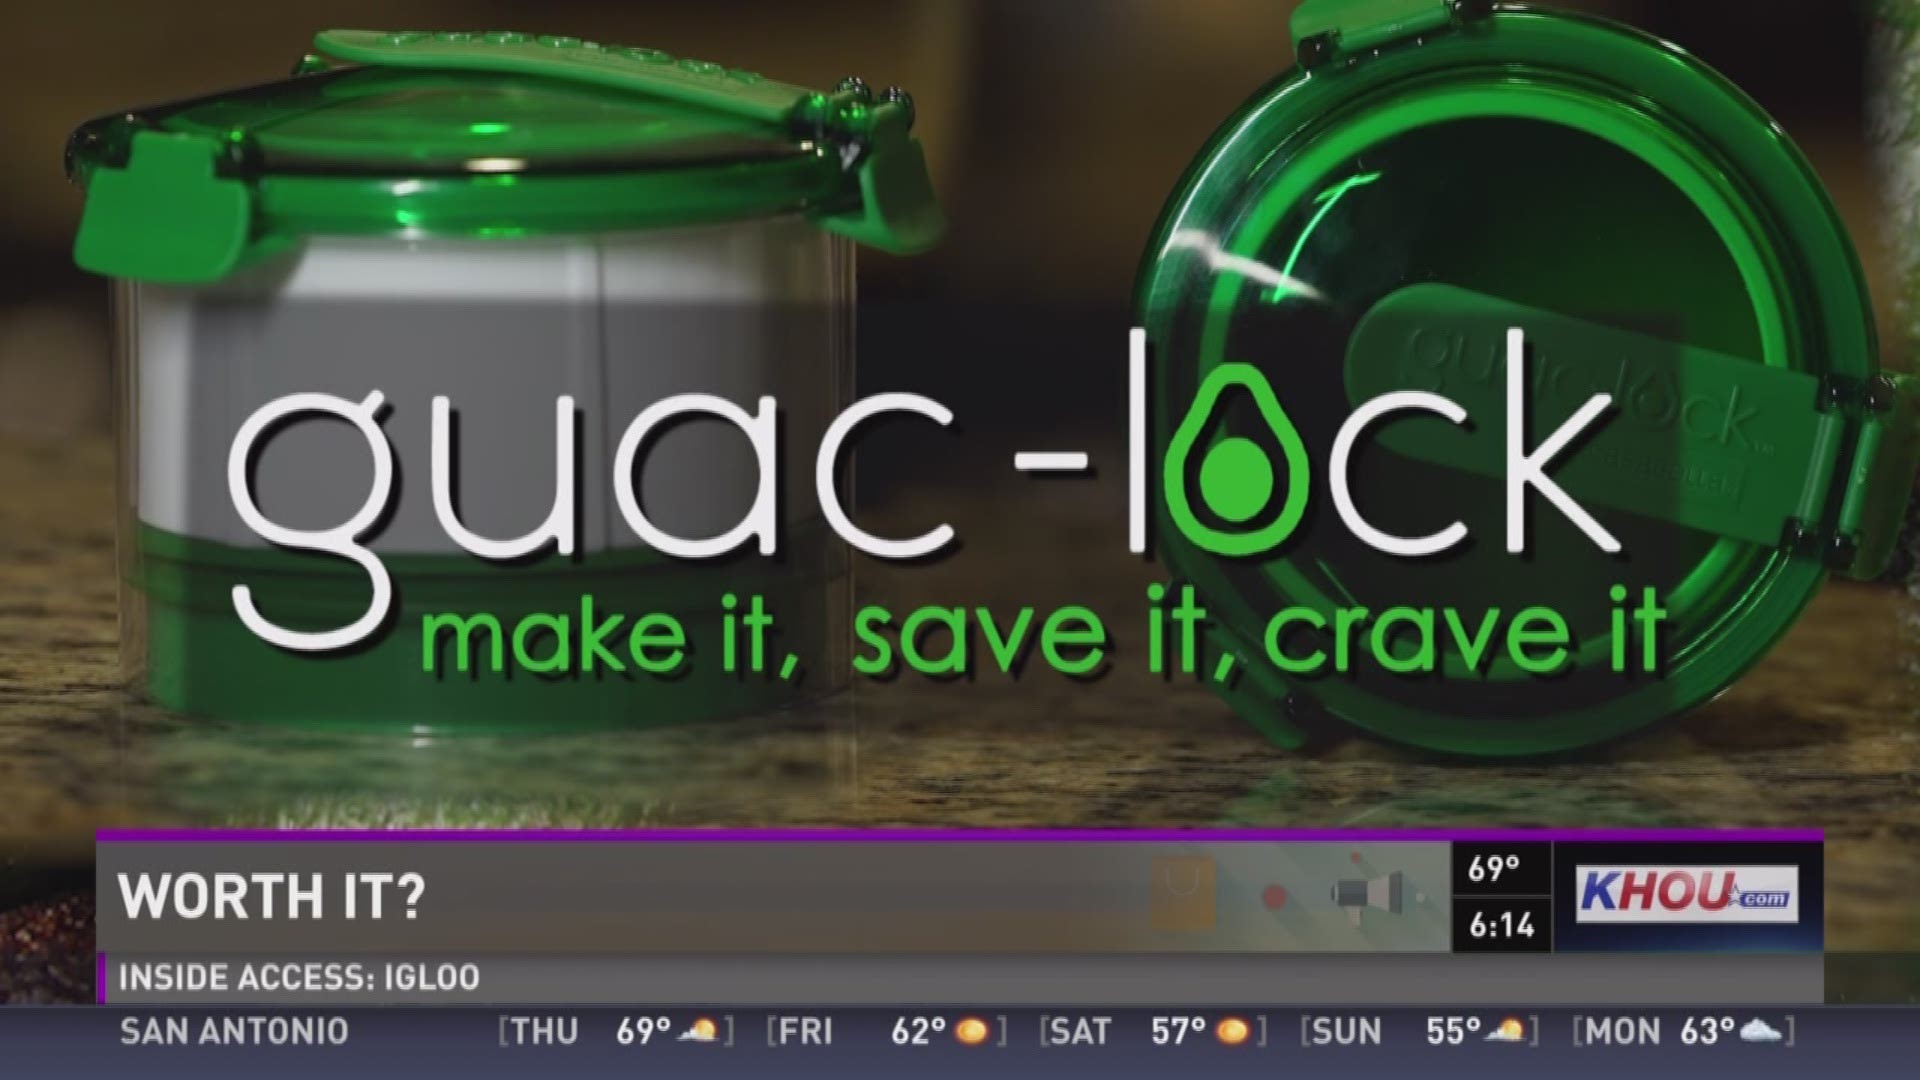 OK guacamole lovers, if there's a gadget that could make your avocado last longer, would you try it?    We found one. Tiffany Craig is putting the Guac-Lock to the test to find out - if it's worth it.